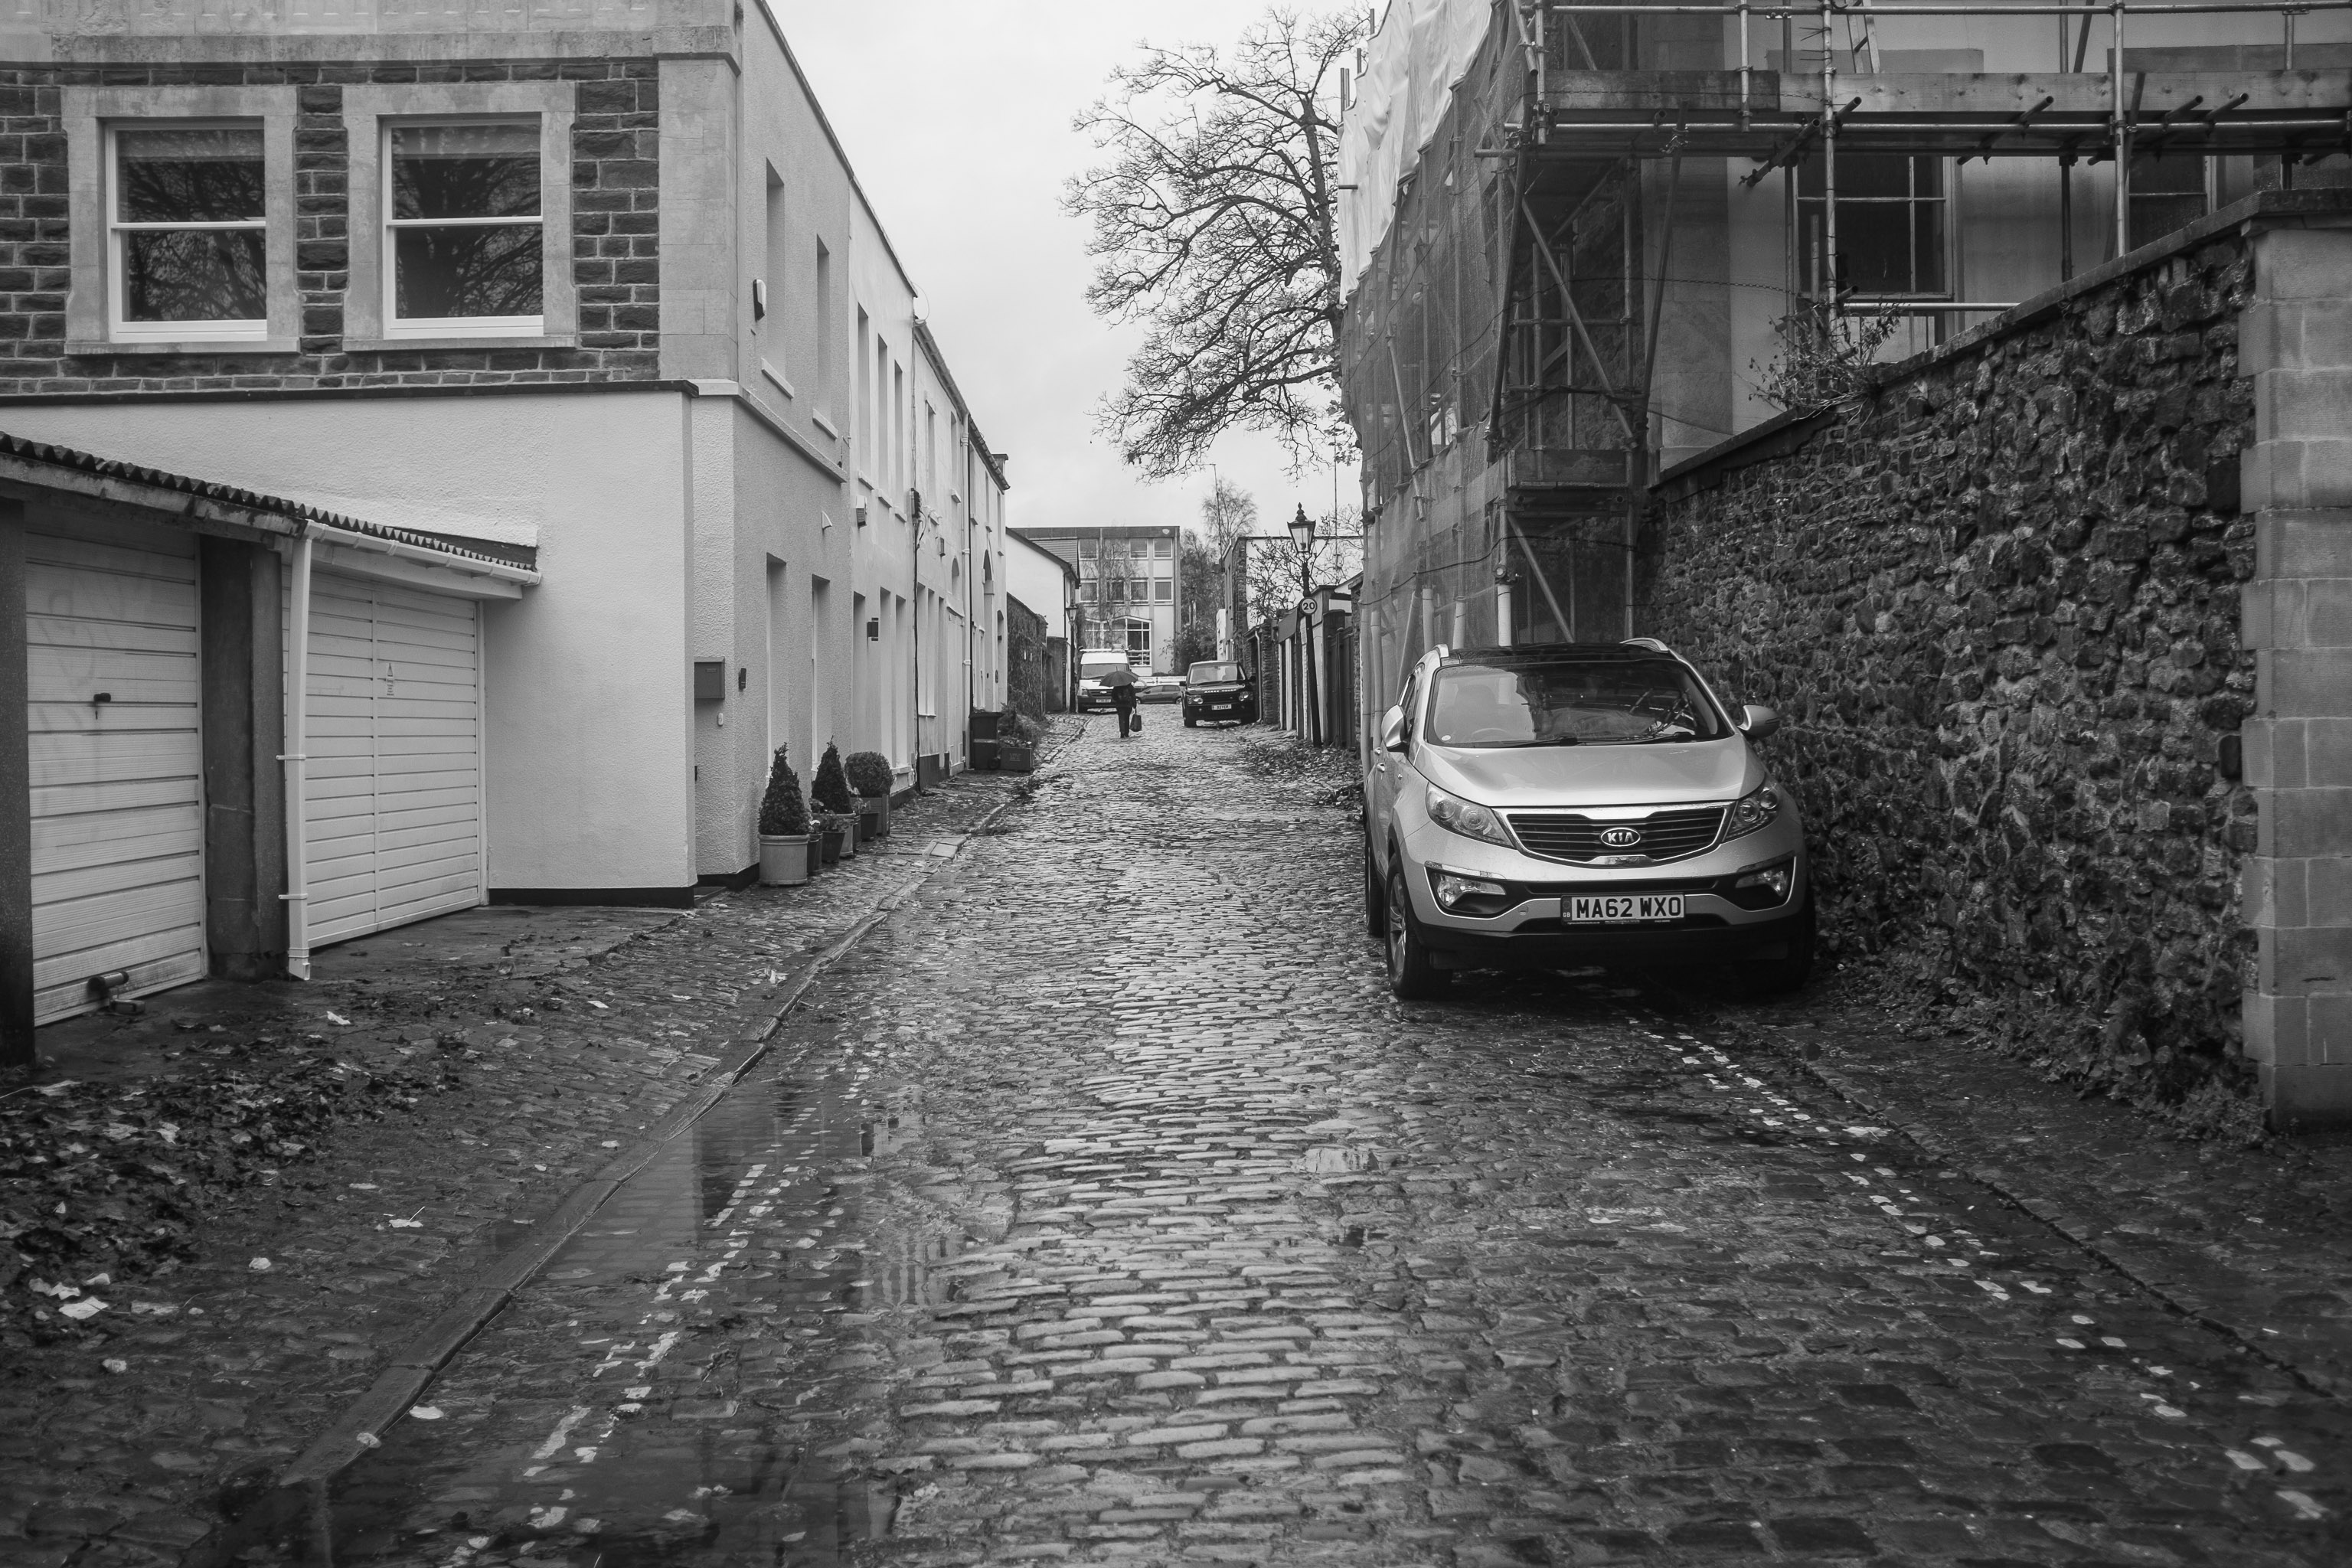 Cobblestone Mews
I find the cobblestones hard to resist, so I've probably taken a snap of this mews pretty much every time I've passed it.
